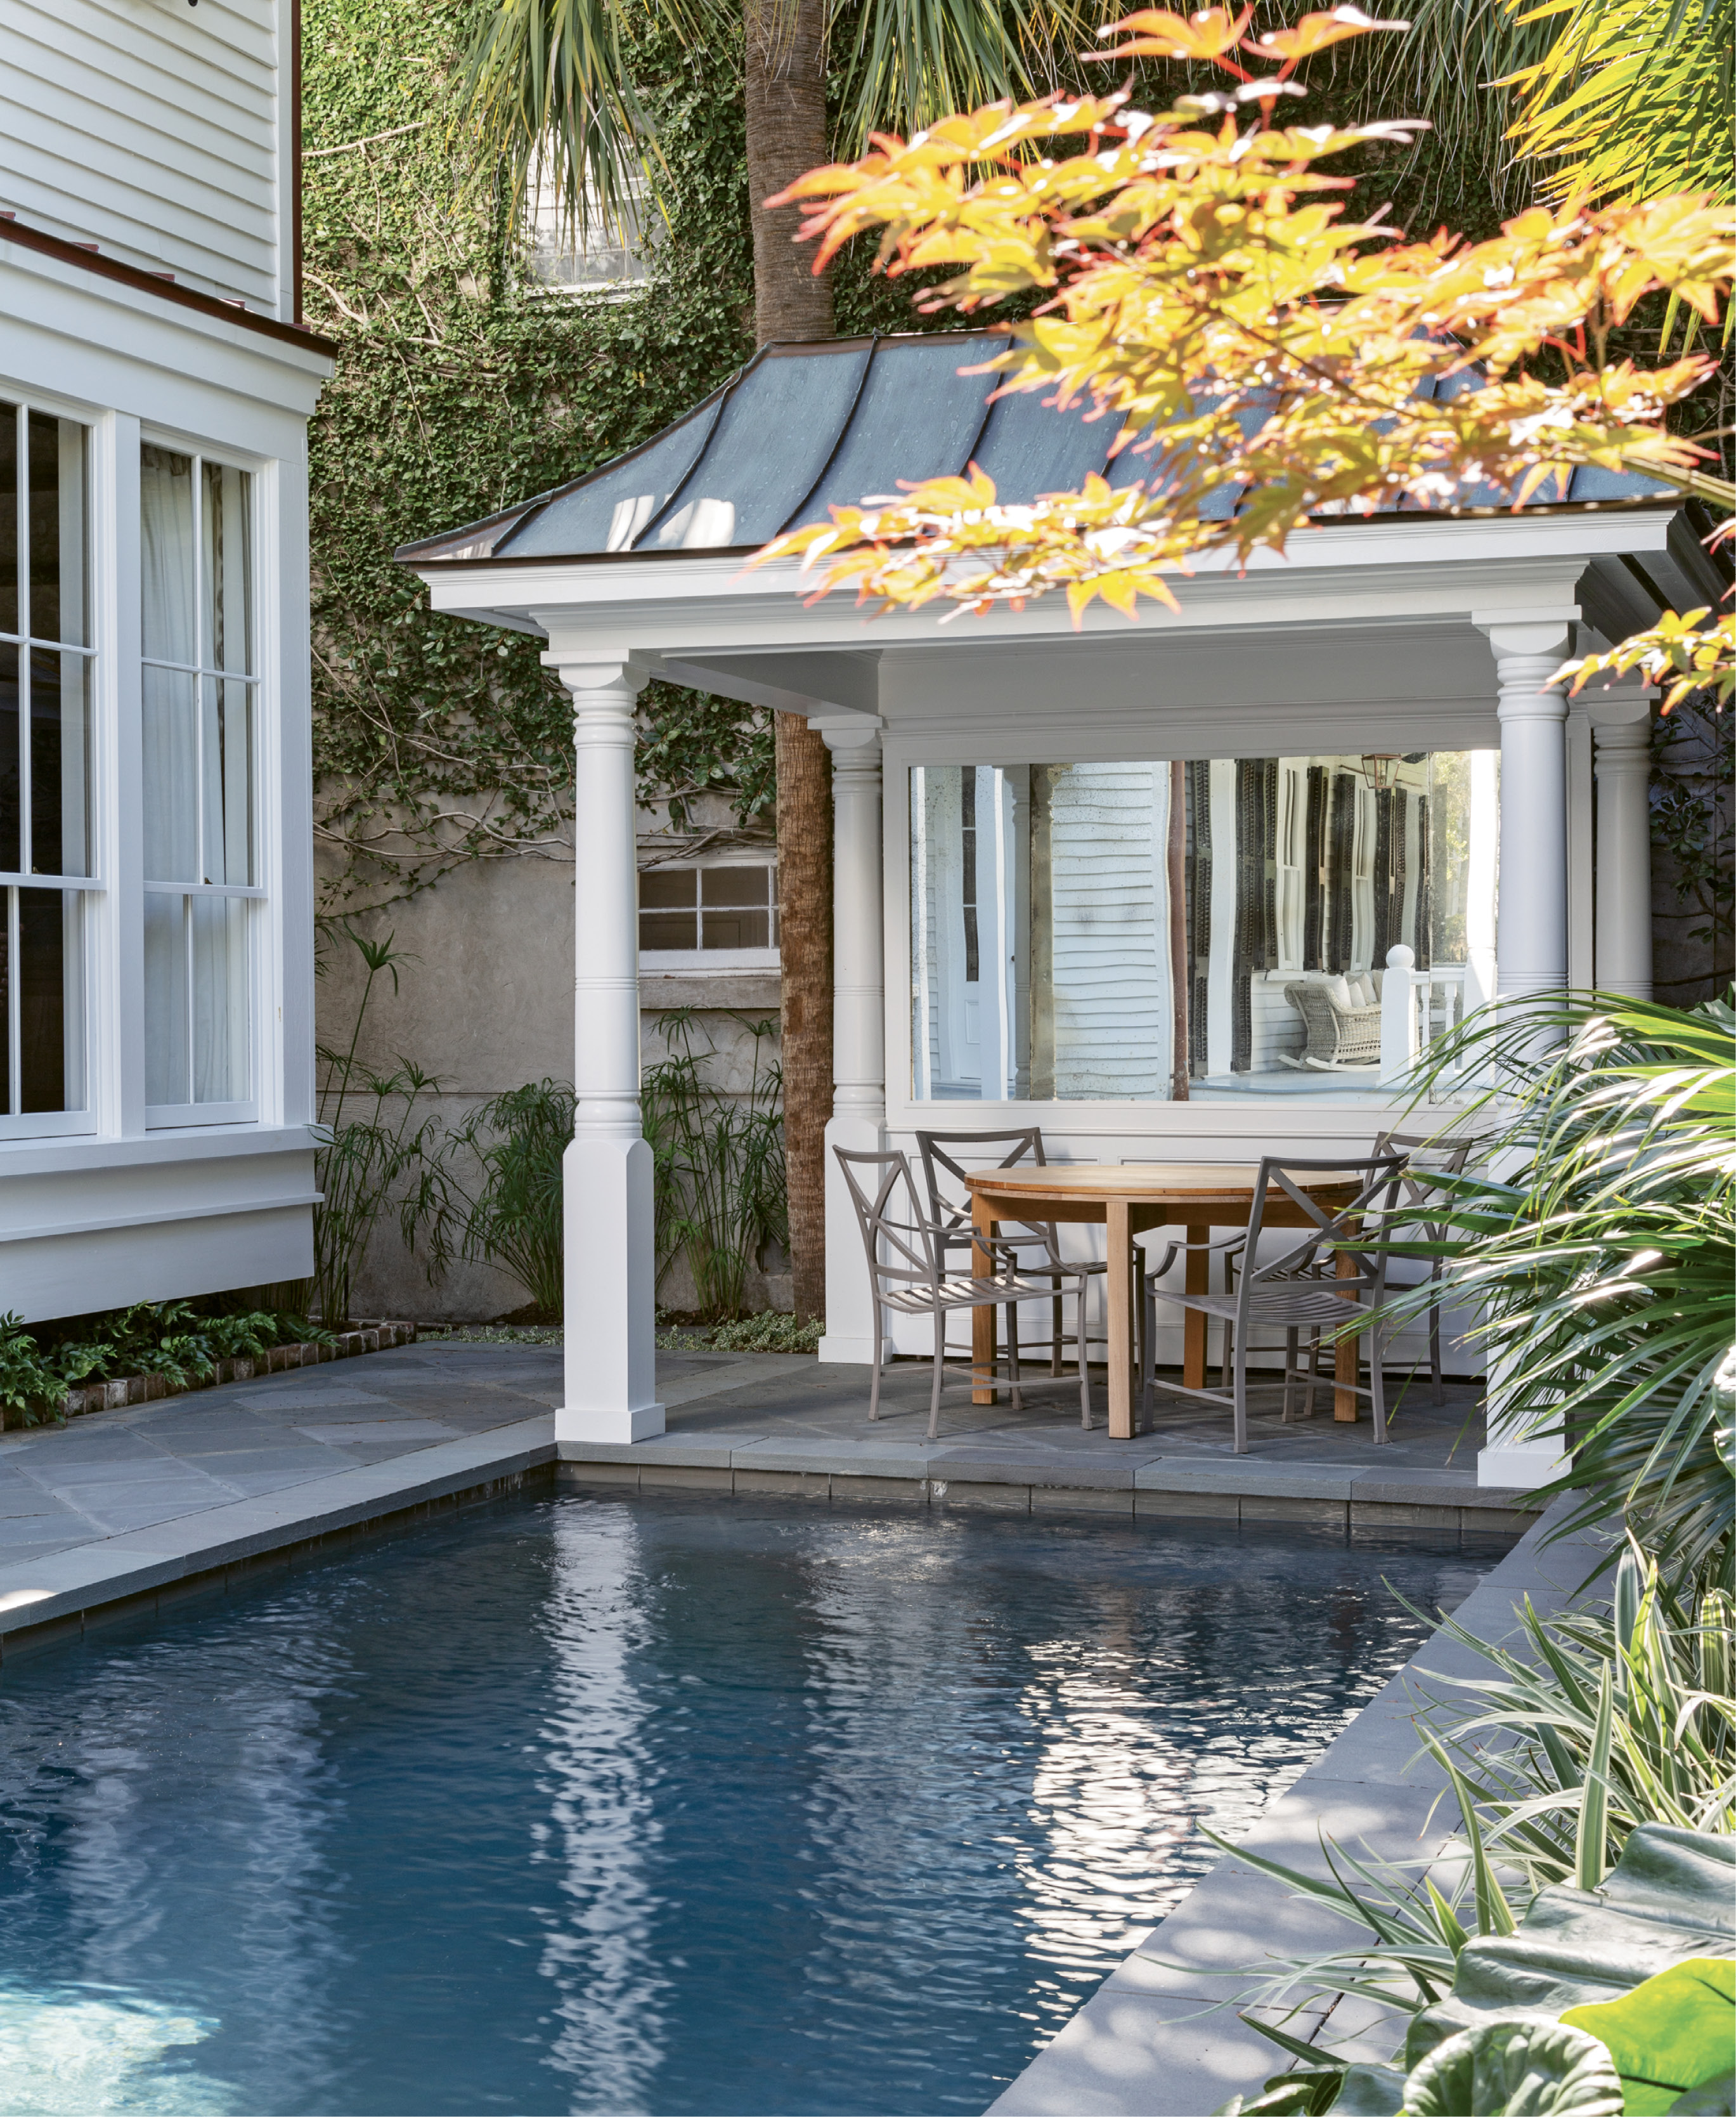 IN THE SWIM: A pool was on the must-have list for the couple, who wanted a spot their children and grandchildren would flock to. The sun-dappled patio provides the perfect perch for relaxing and watching them play.